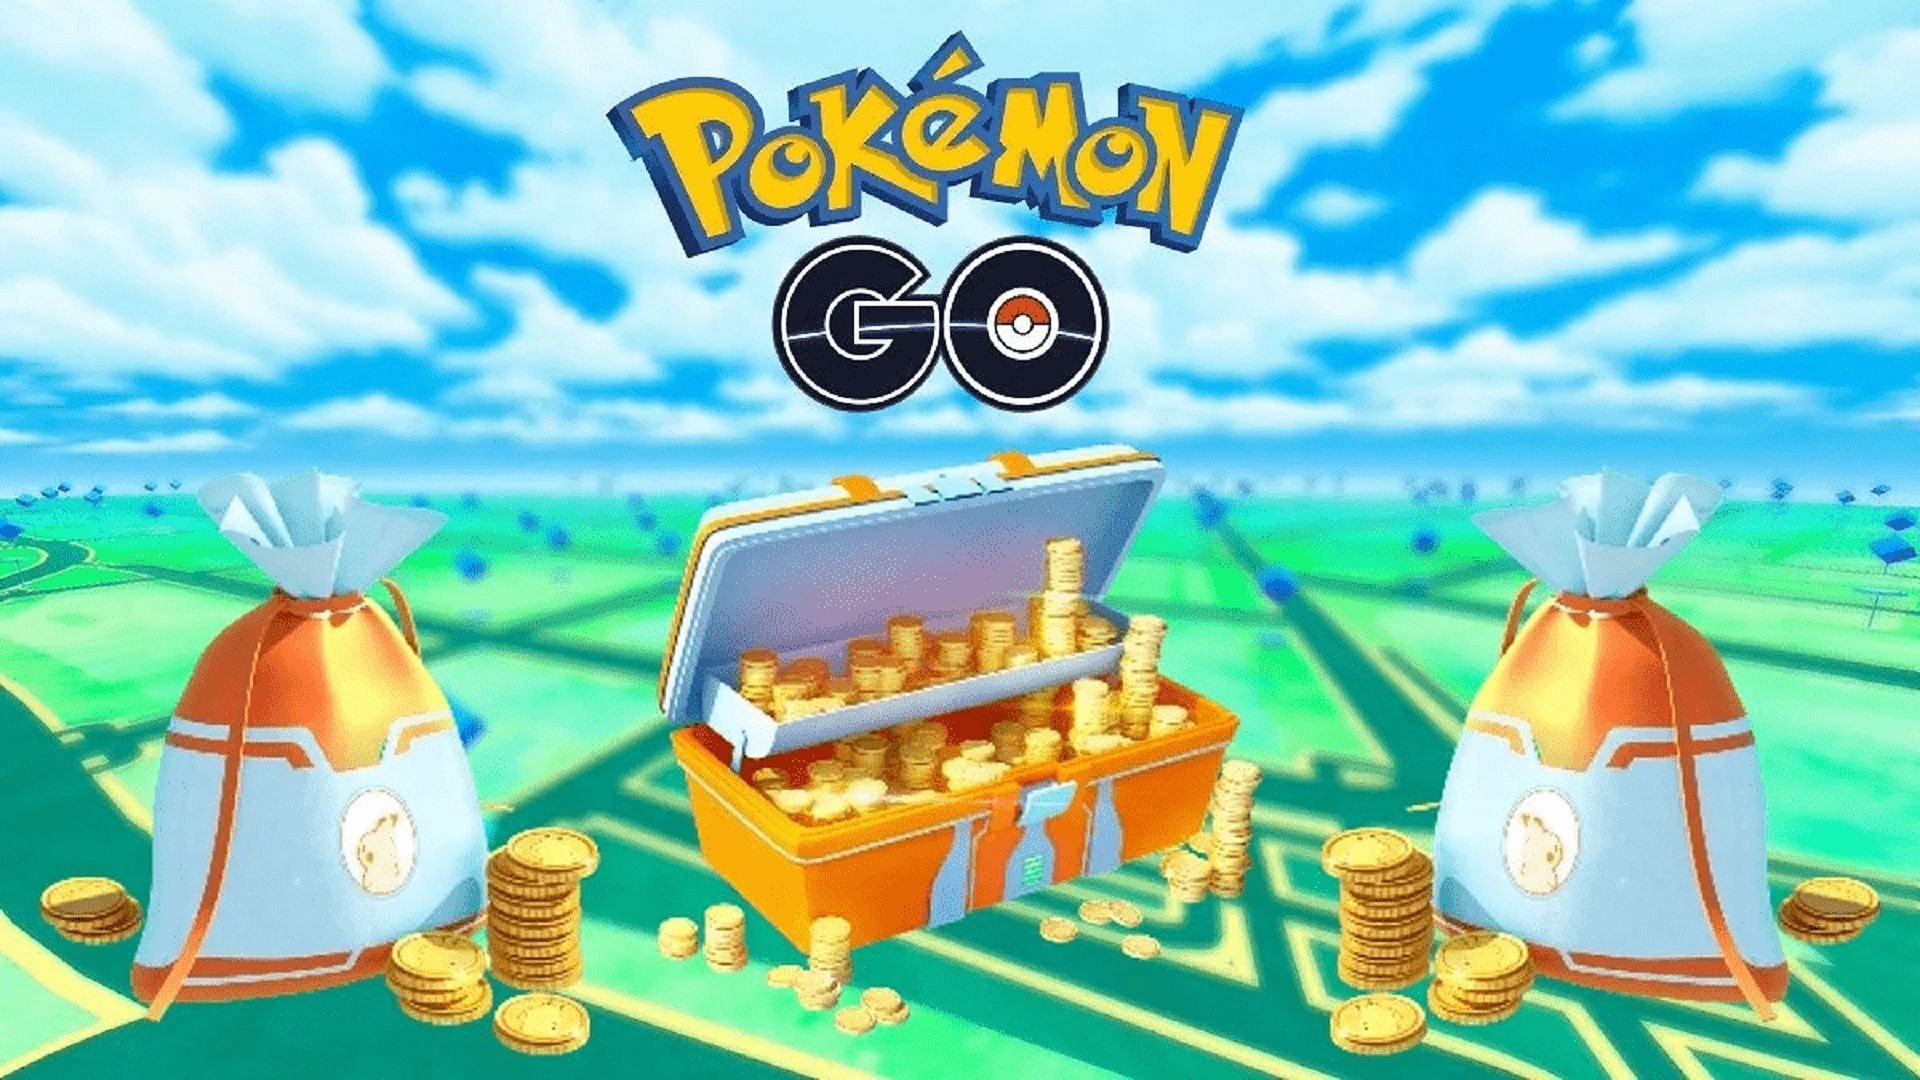 Earning and using Pokecoins in Pokemon GO could use its fair share of attention (Image via Niantic)